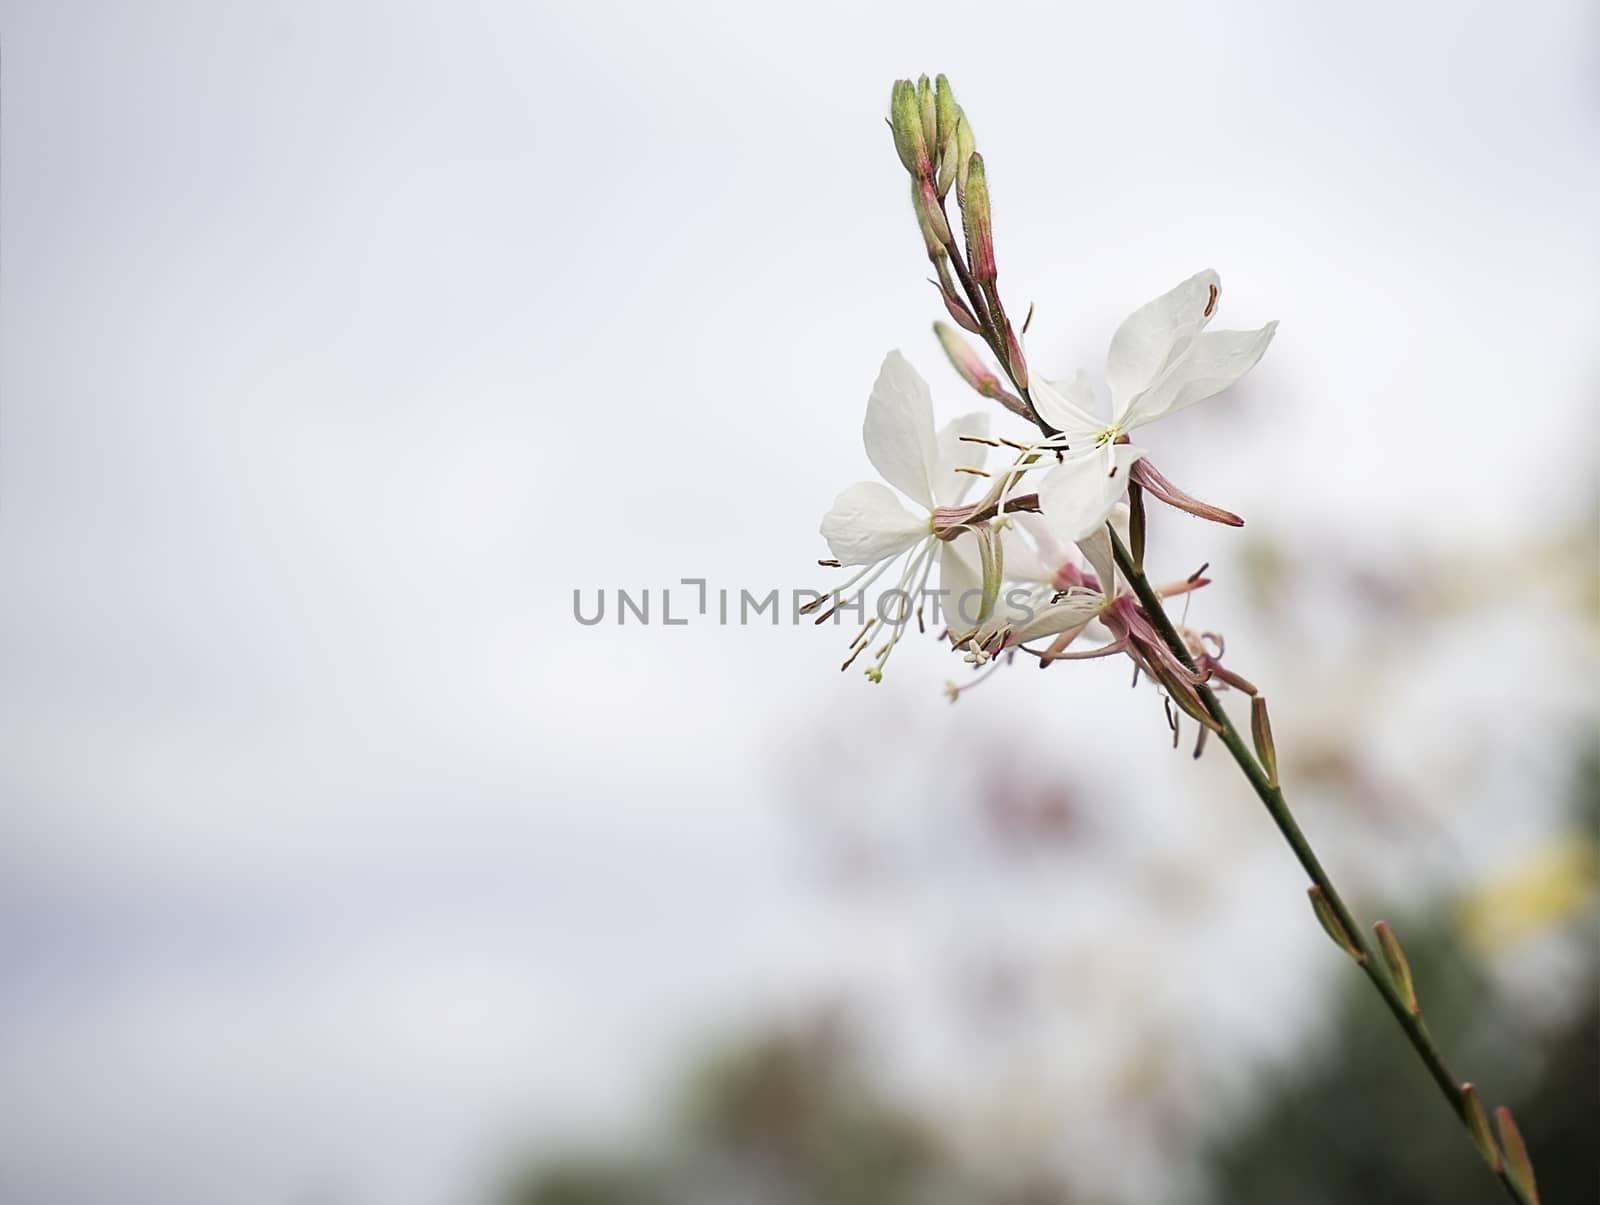 Gaura flower or butterfly bush with neutral copy-space background suitable for mourning condolence and sympathy greeting card